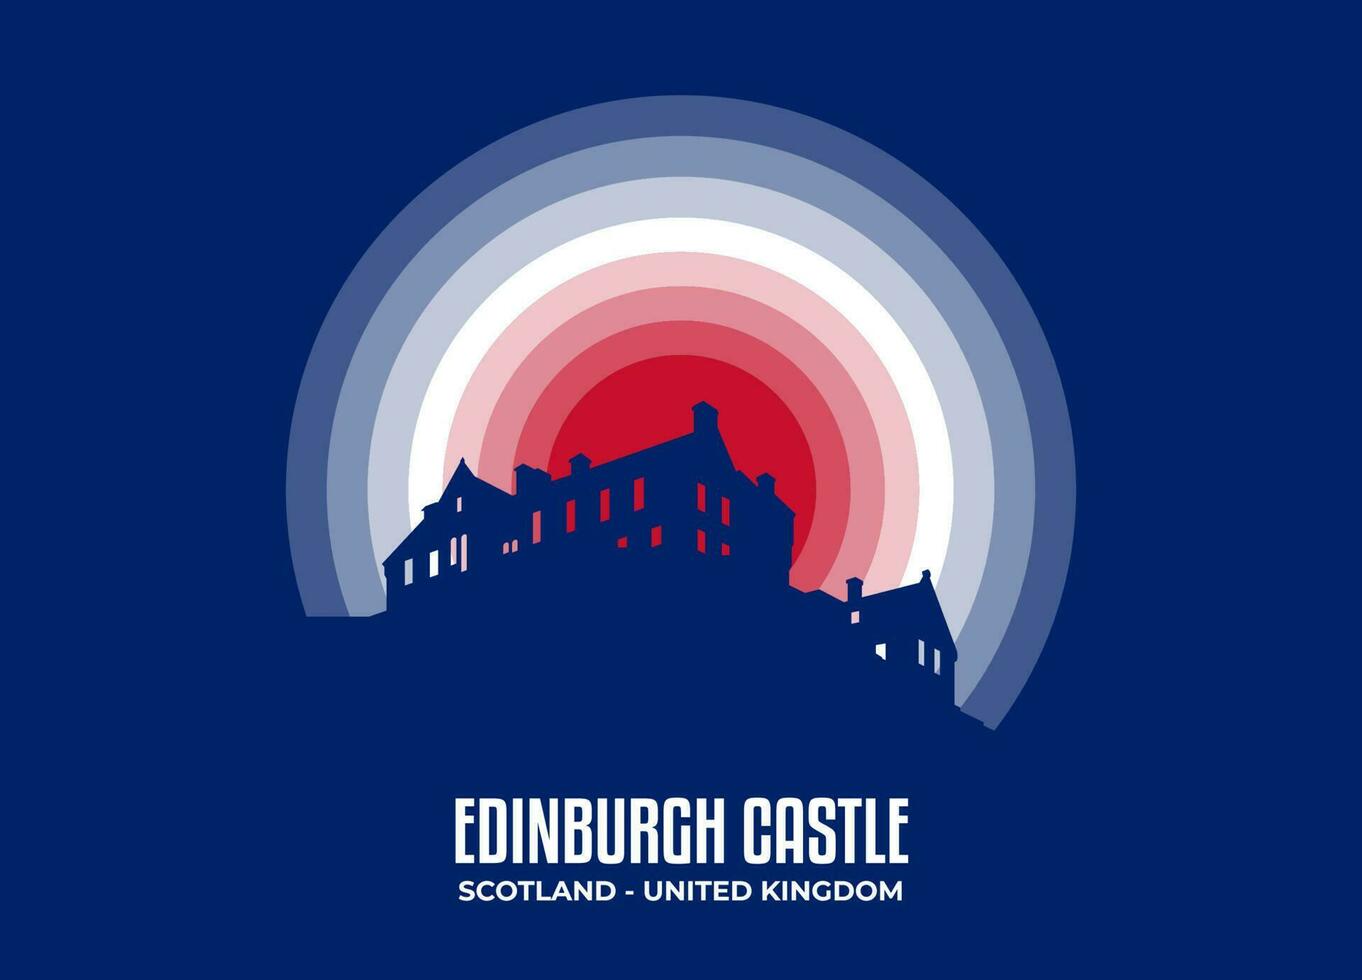 Edinburgh Castle. Moonlight illustration of famous historical statue and architecture in United Kingdom. Color tone based on flag. Vector eps 10